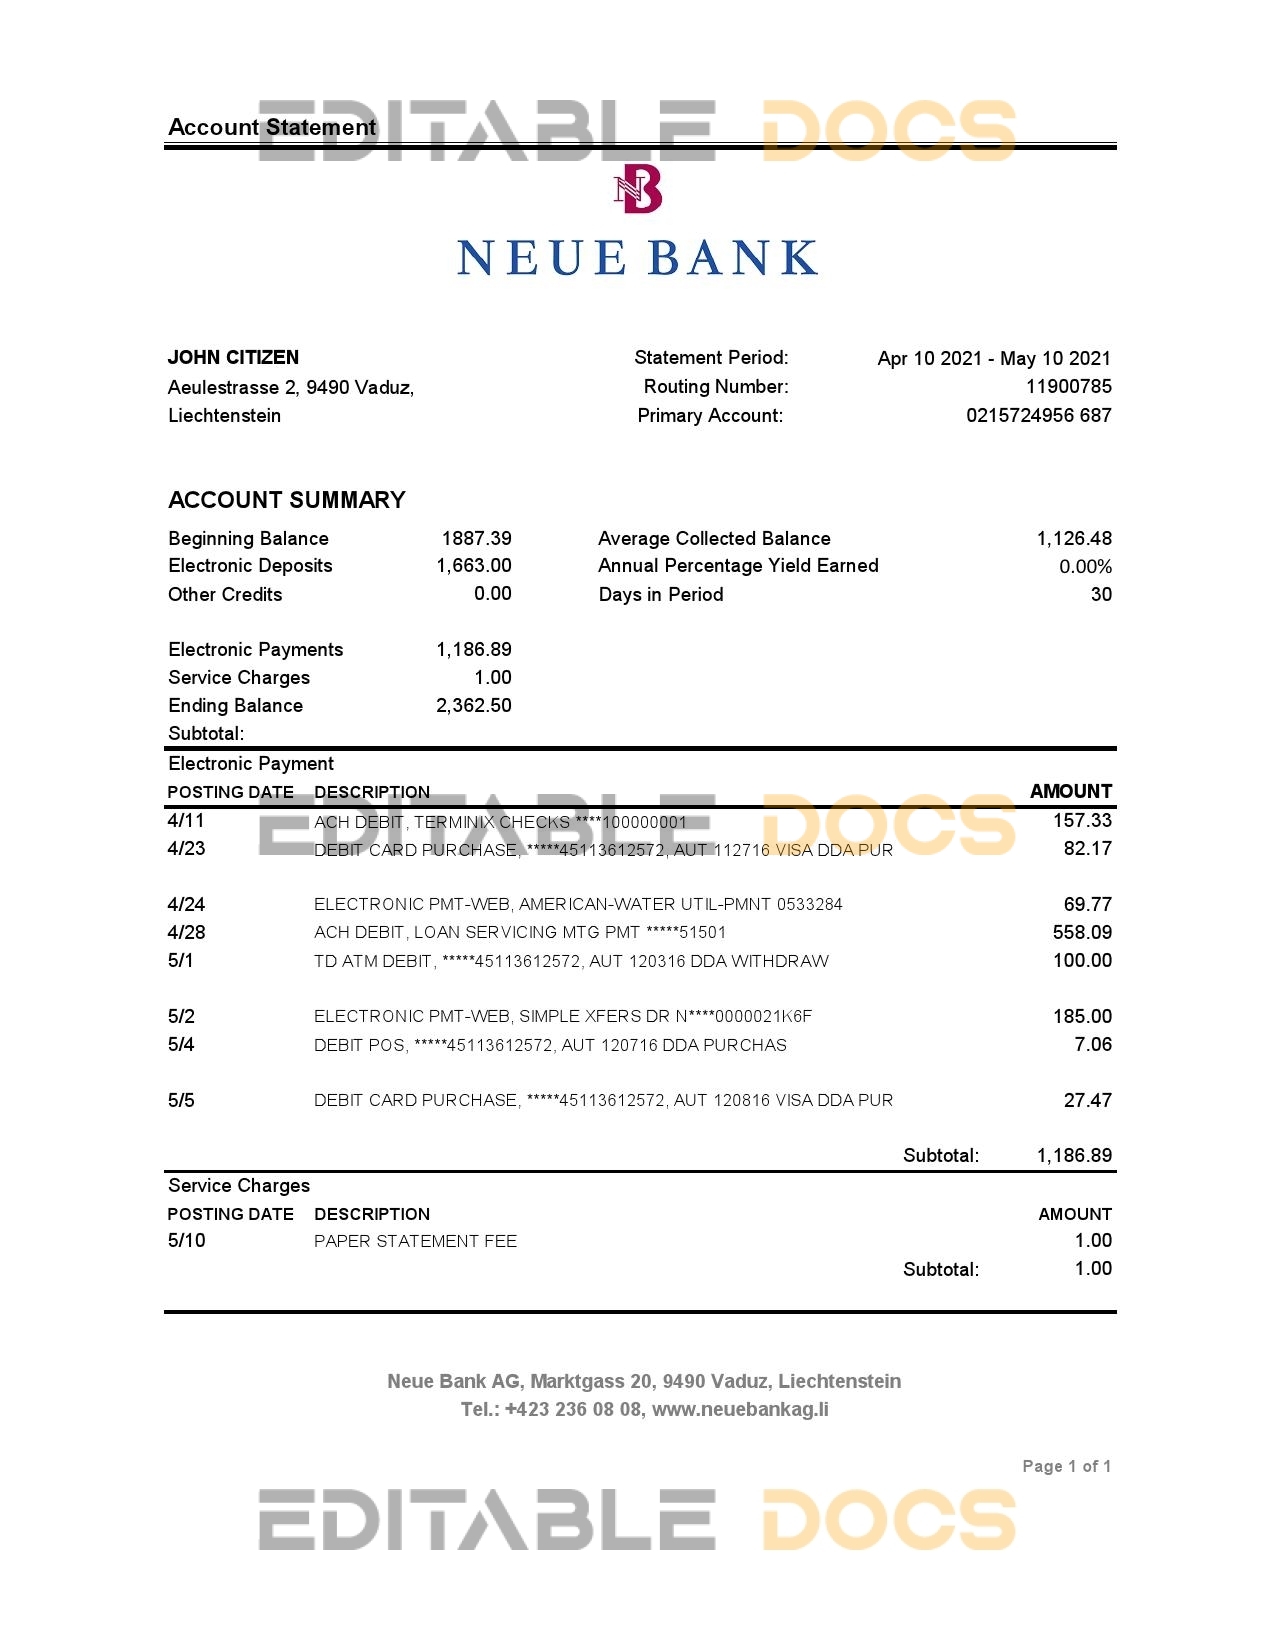 Liechtenstein Neue Bank AG bank statement easy to fill template in .xls and .pdf file format